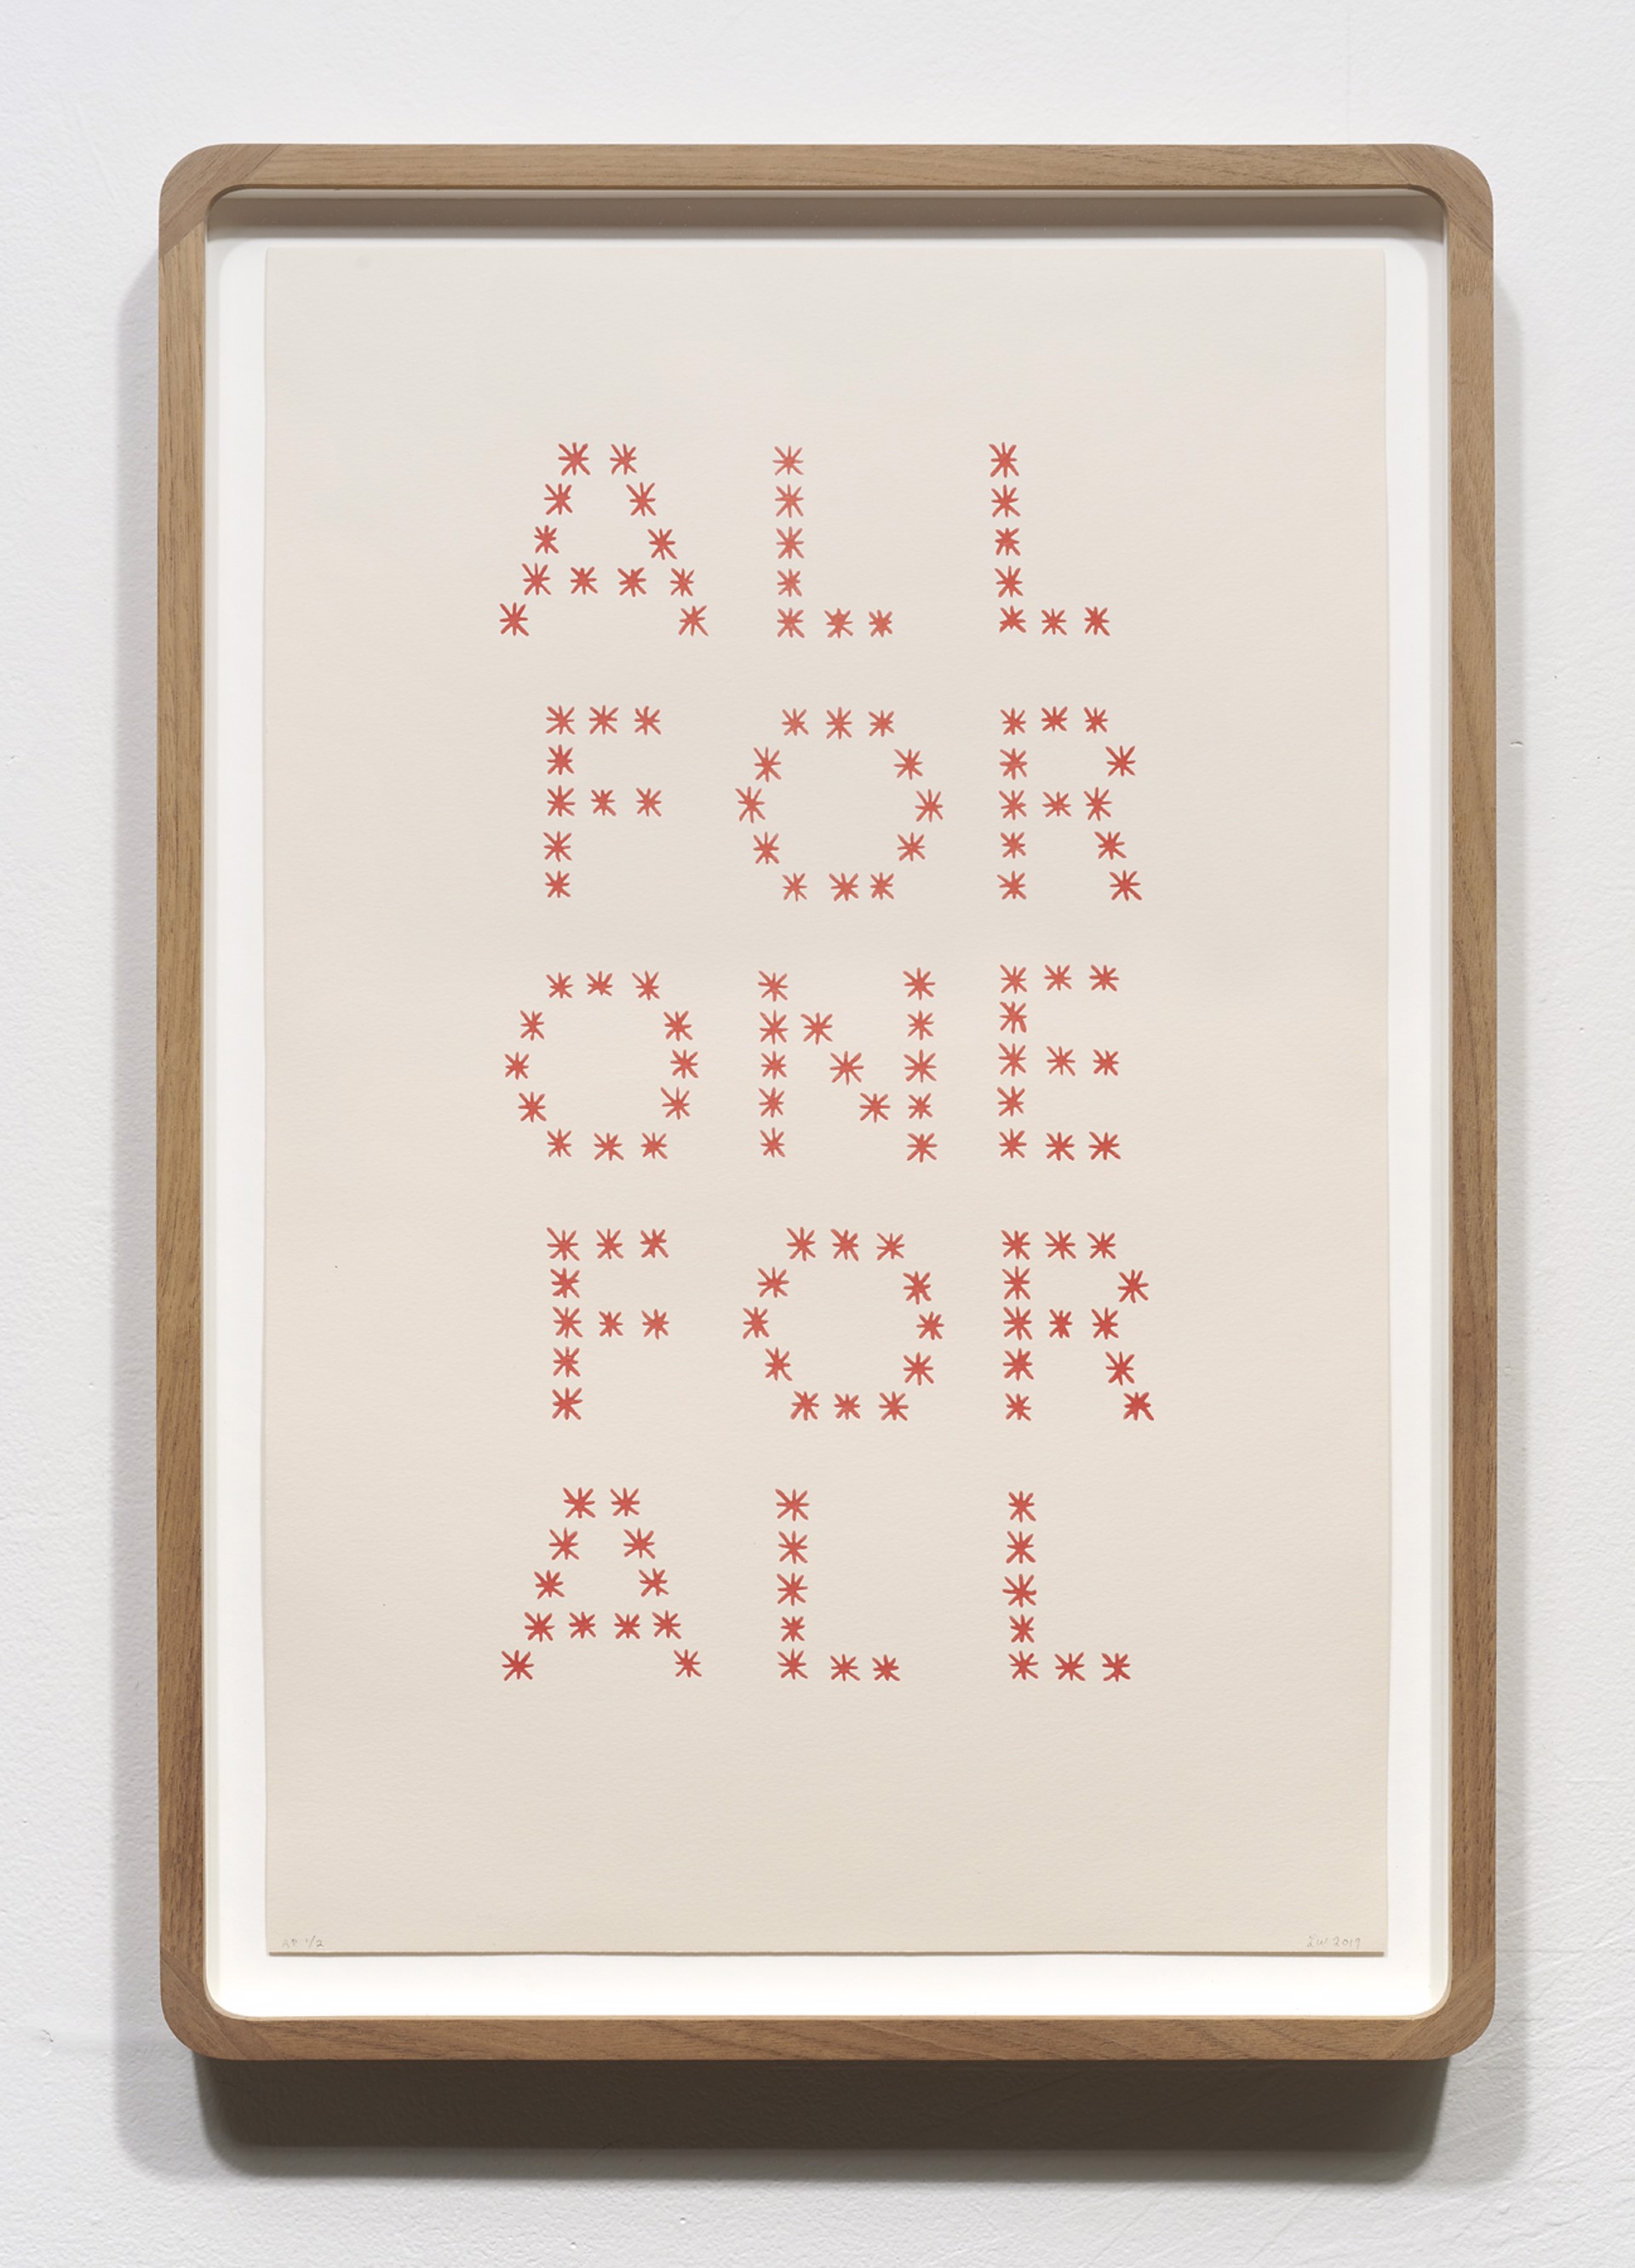 All for One For All (unframed print) by Lena Wolff